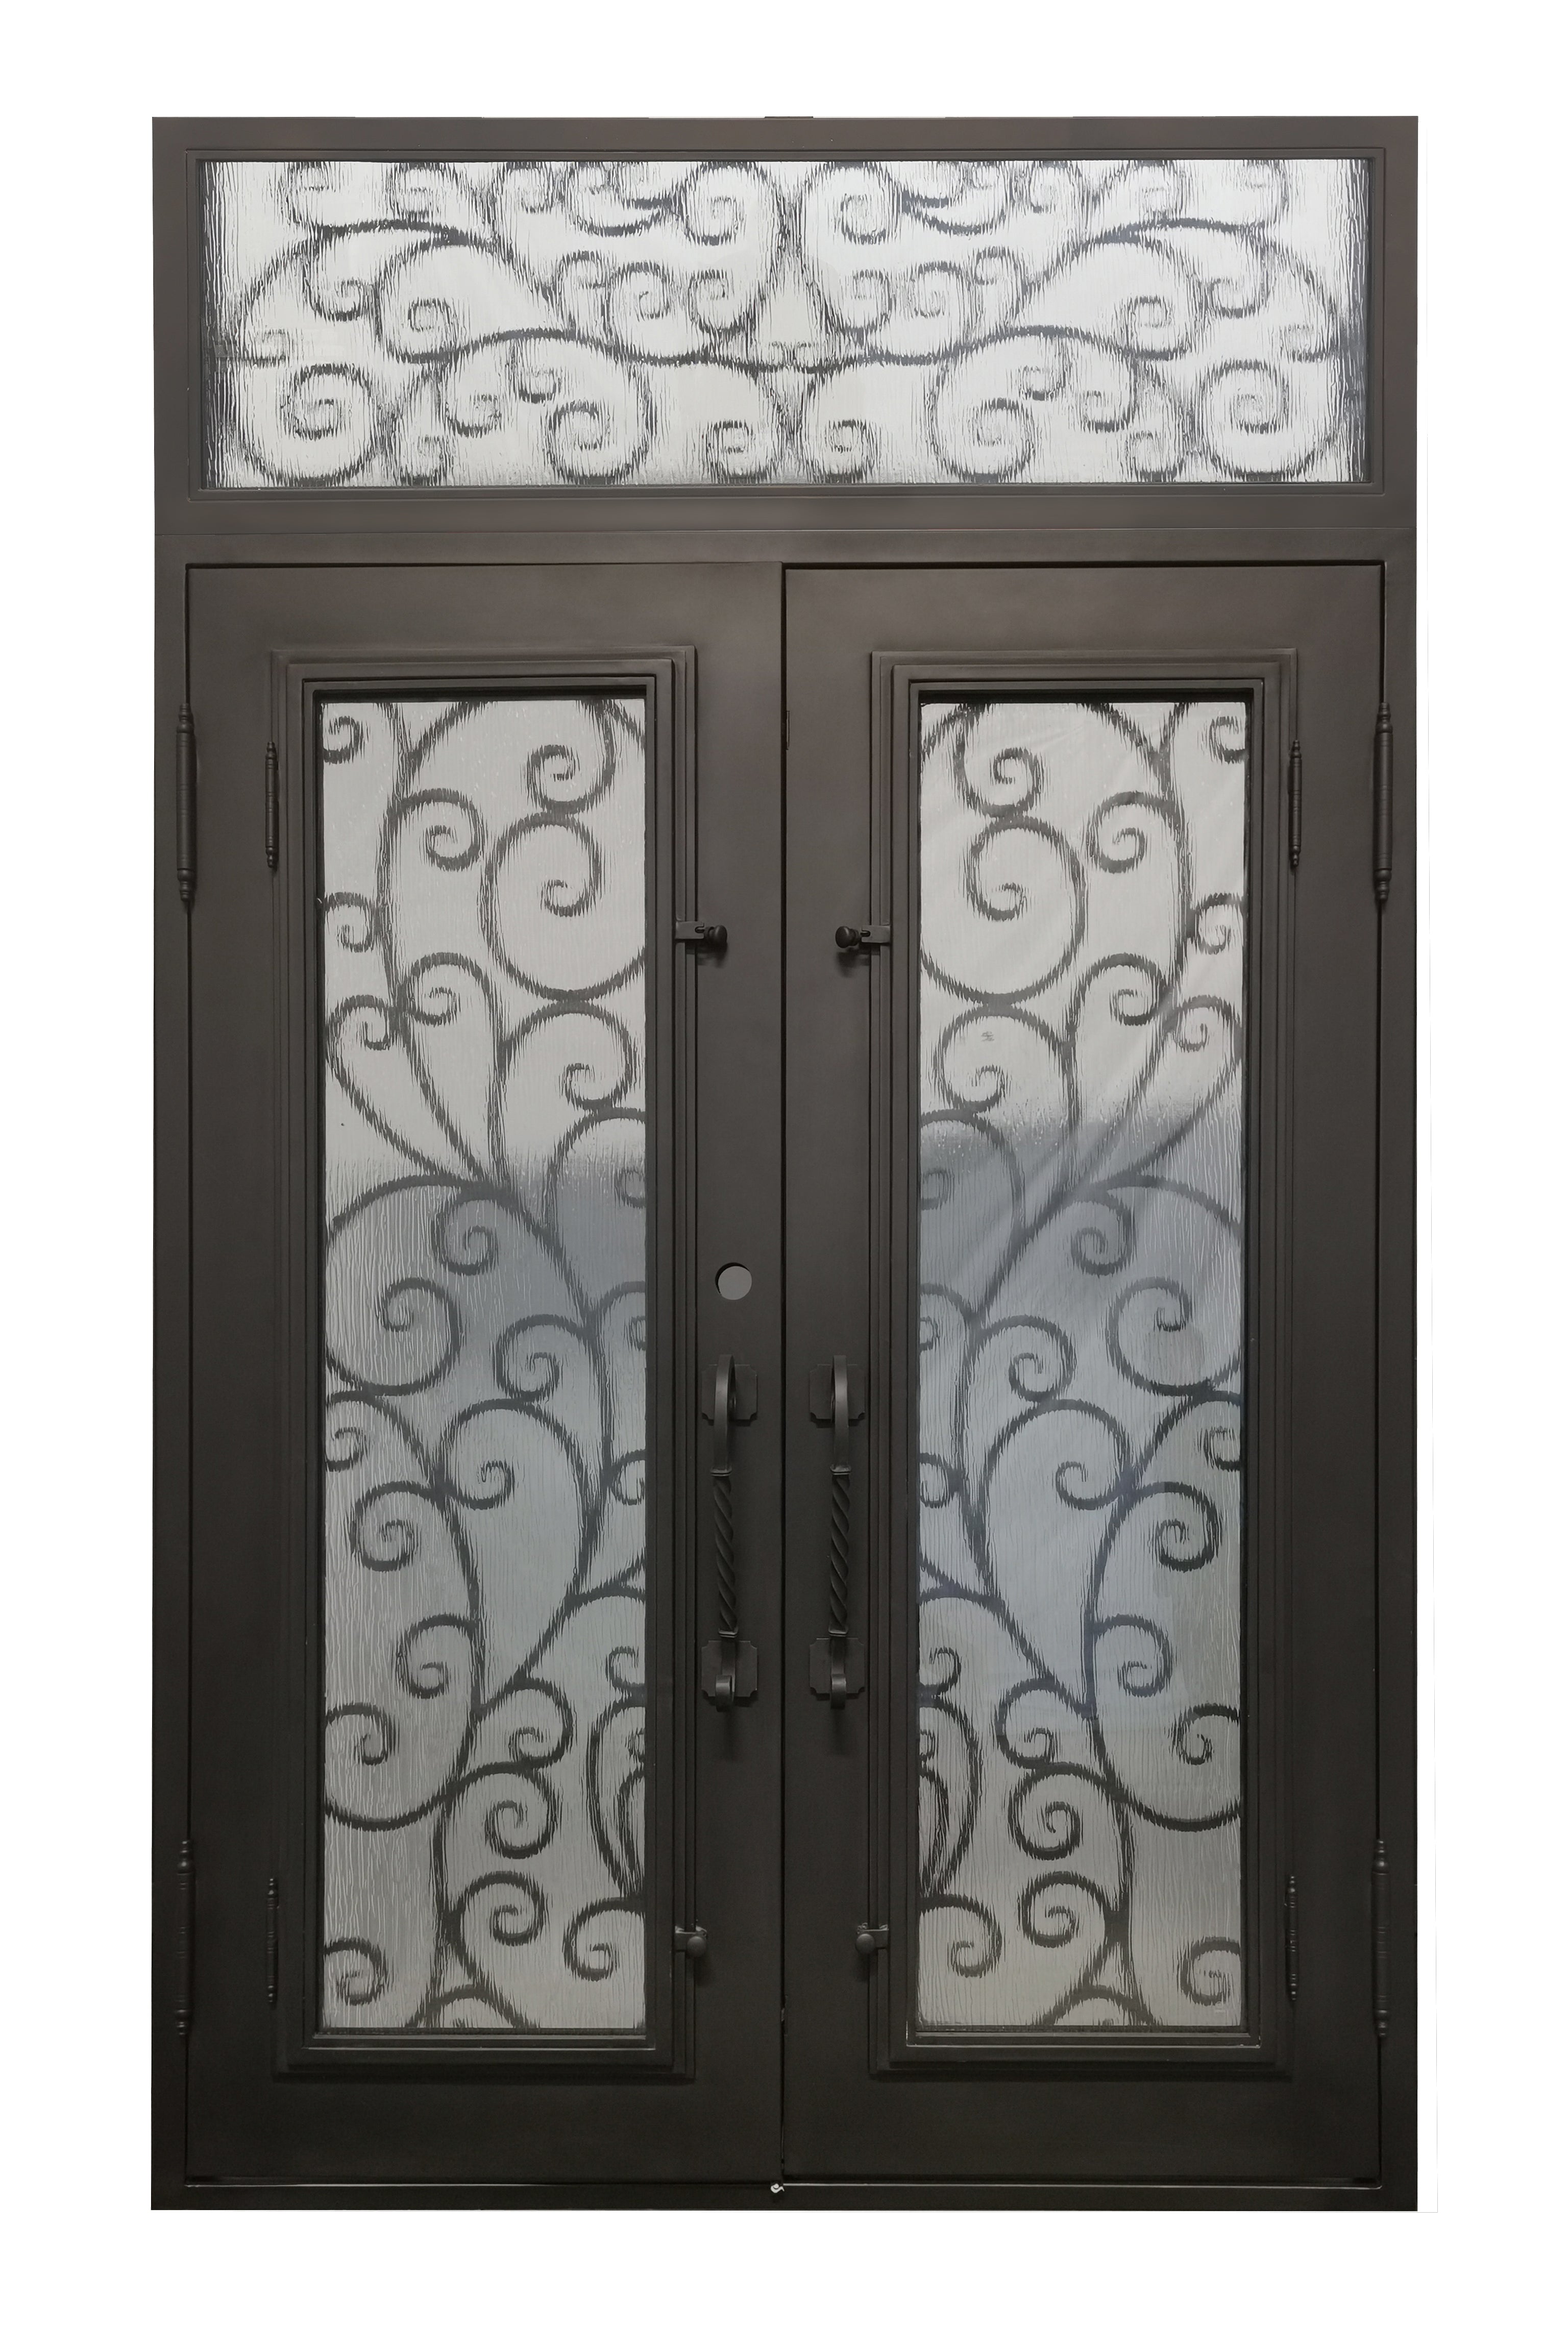 Benbrook Model Front Entry Door With Transom 72 By 120  Dark Bronze Finish - AAWAIZ IMPORTS